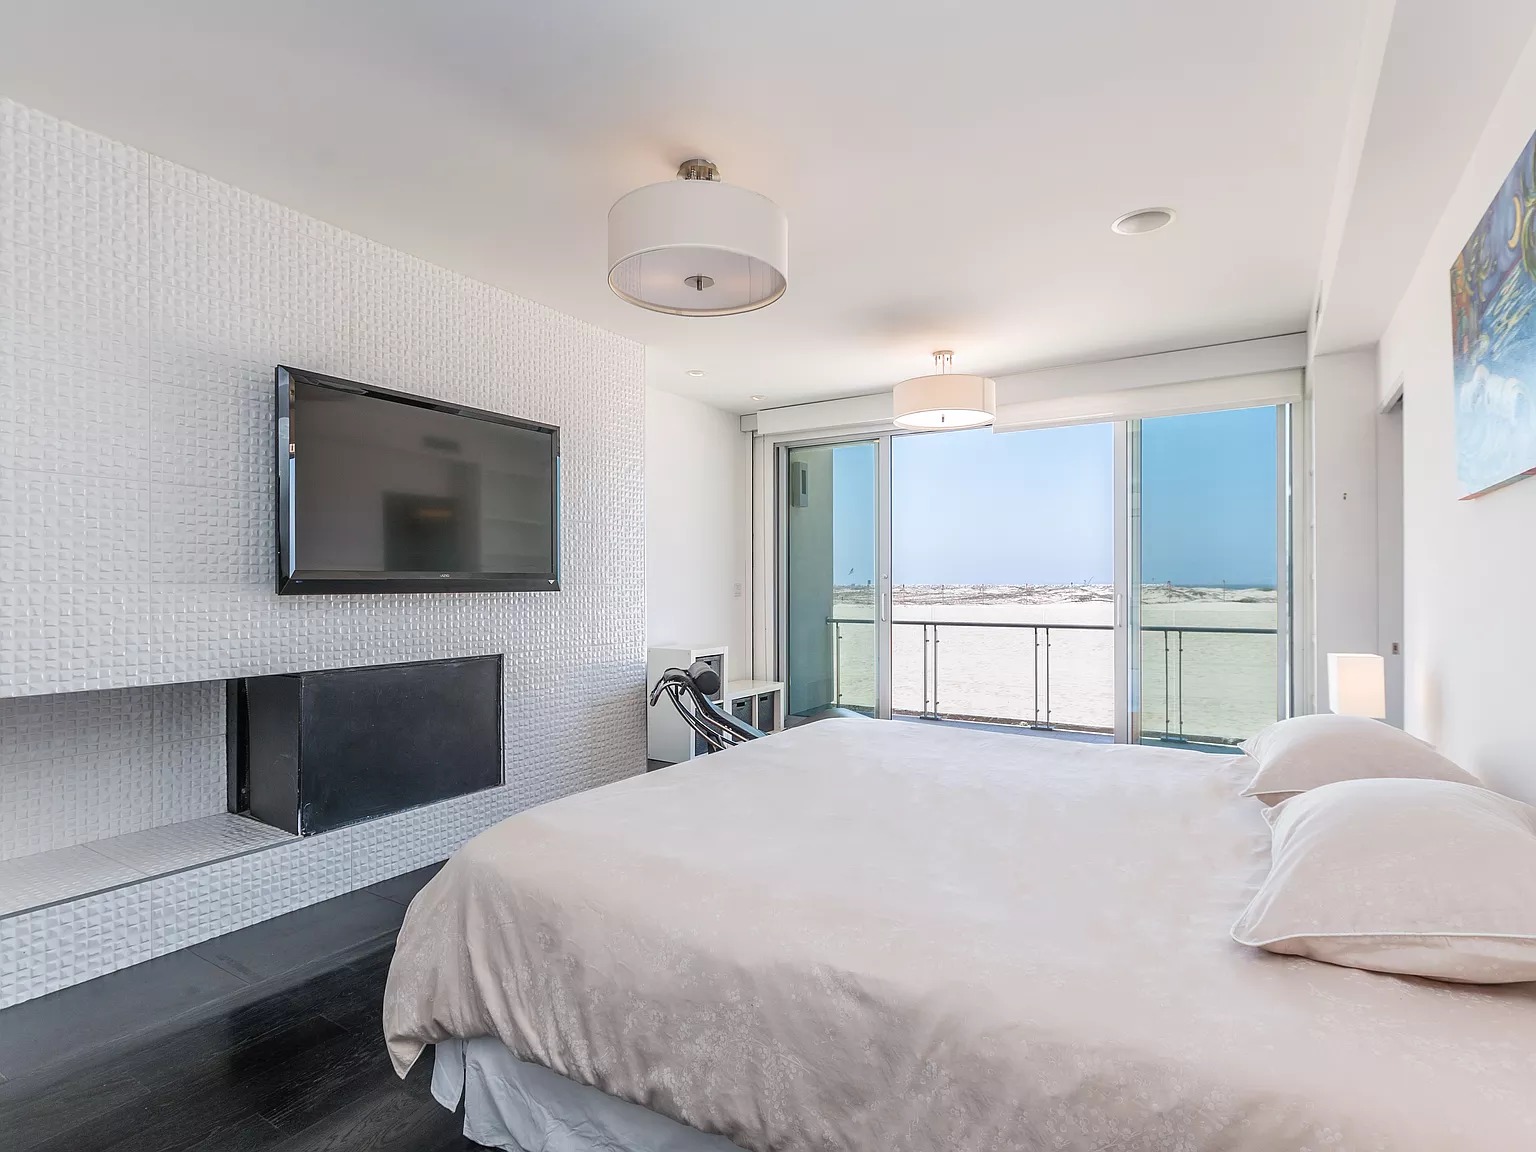 5205 Ocean Front Walk APT 203, Marina Del Rey, CA 90292 - $3,595,000 home for sale, house images, photos and pics gallery